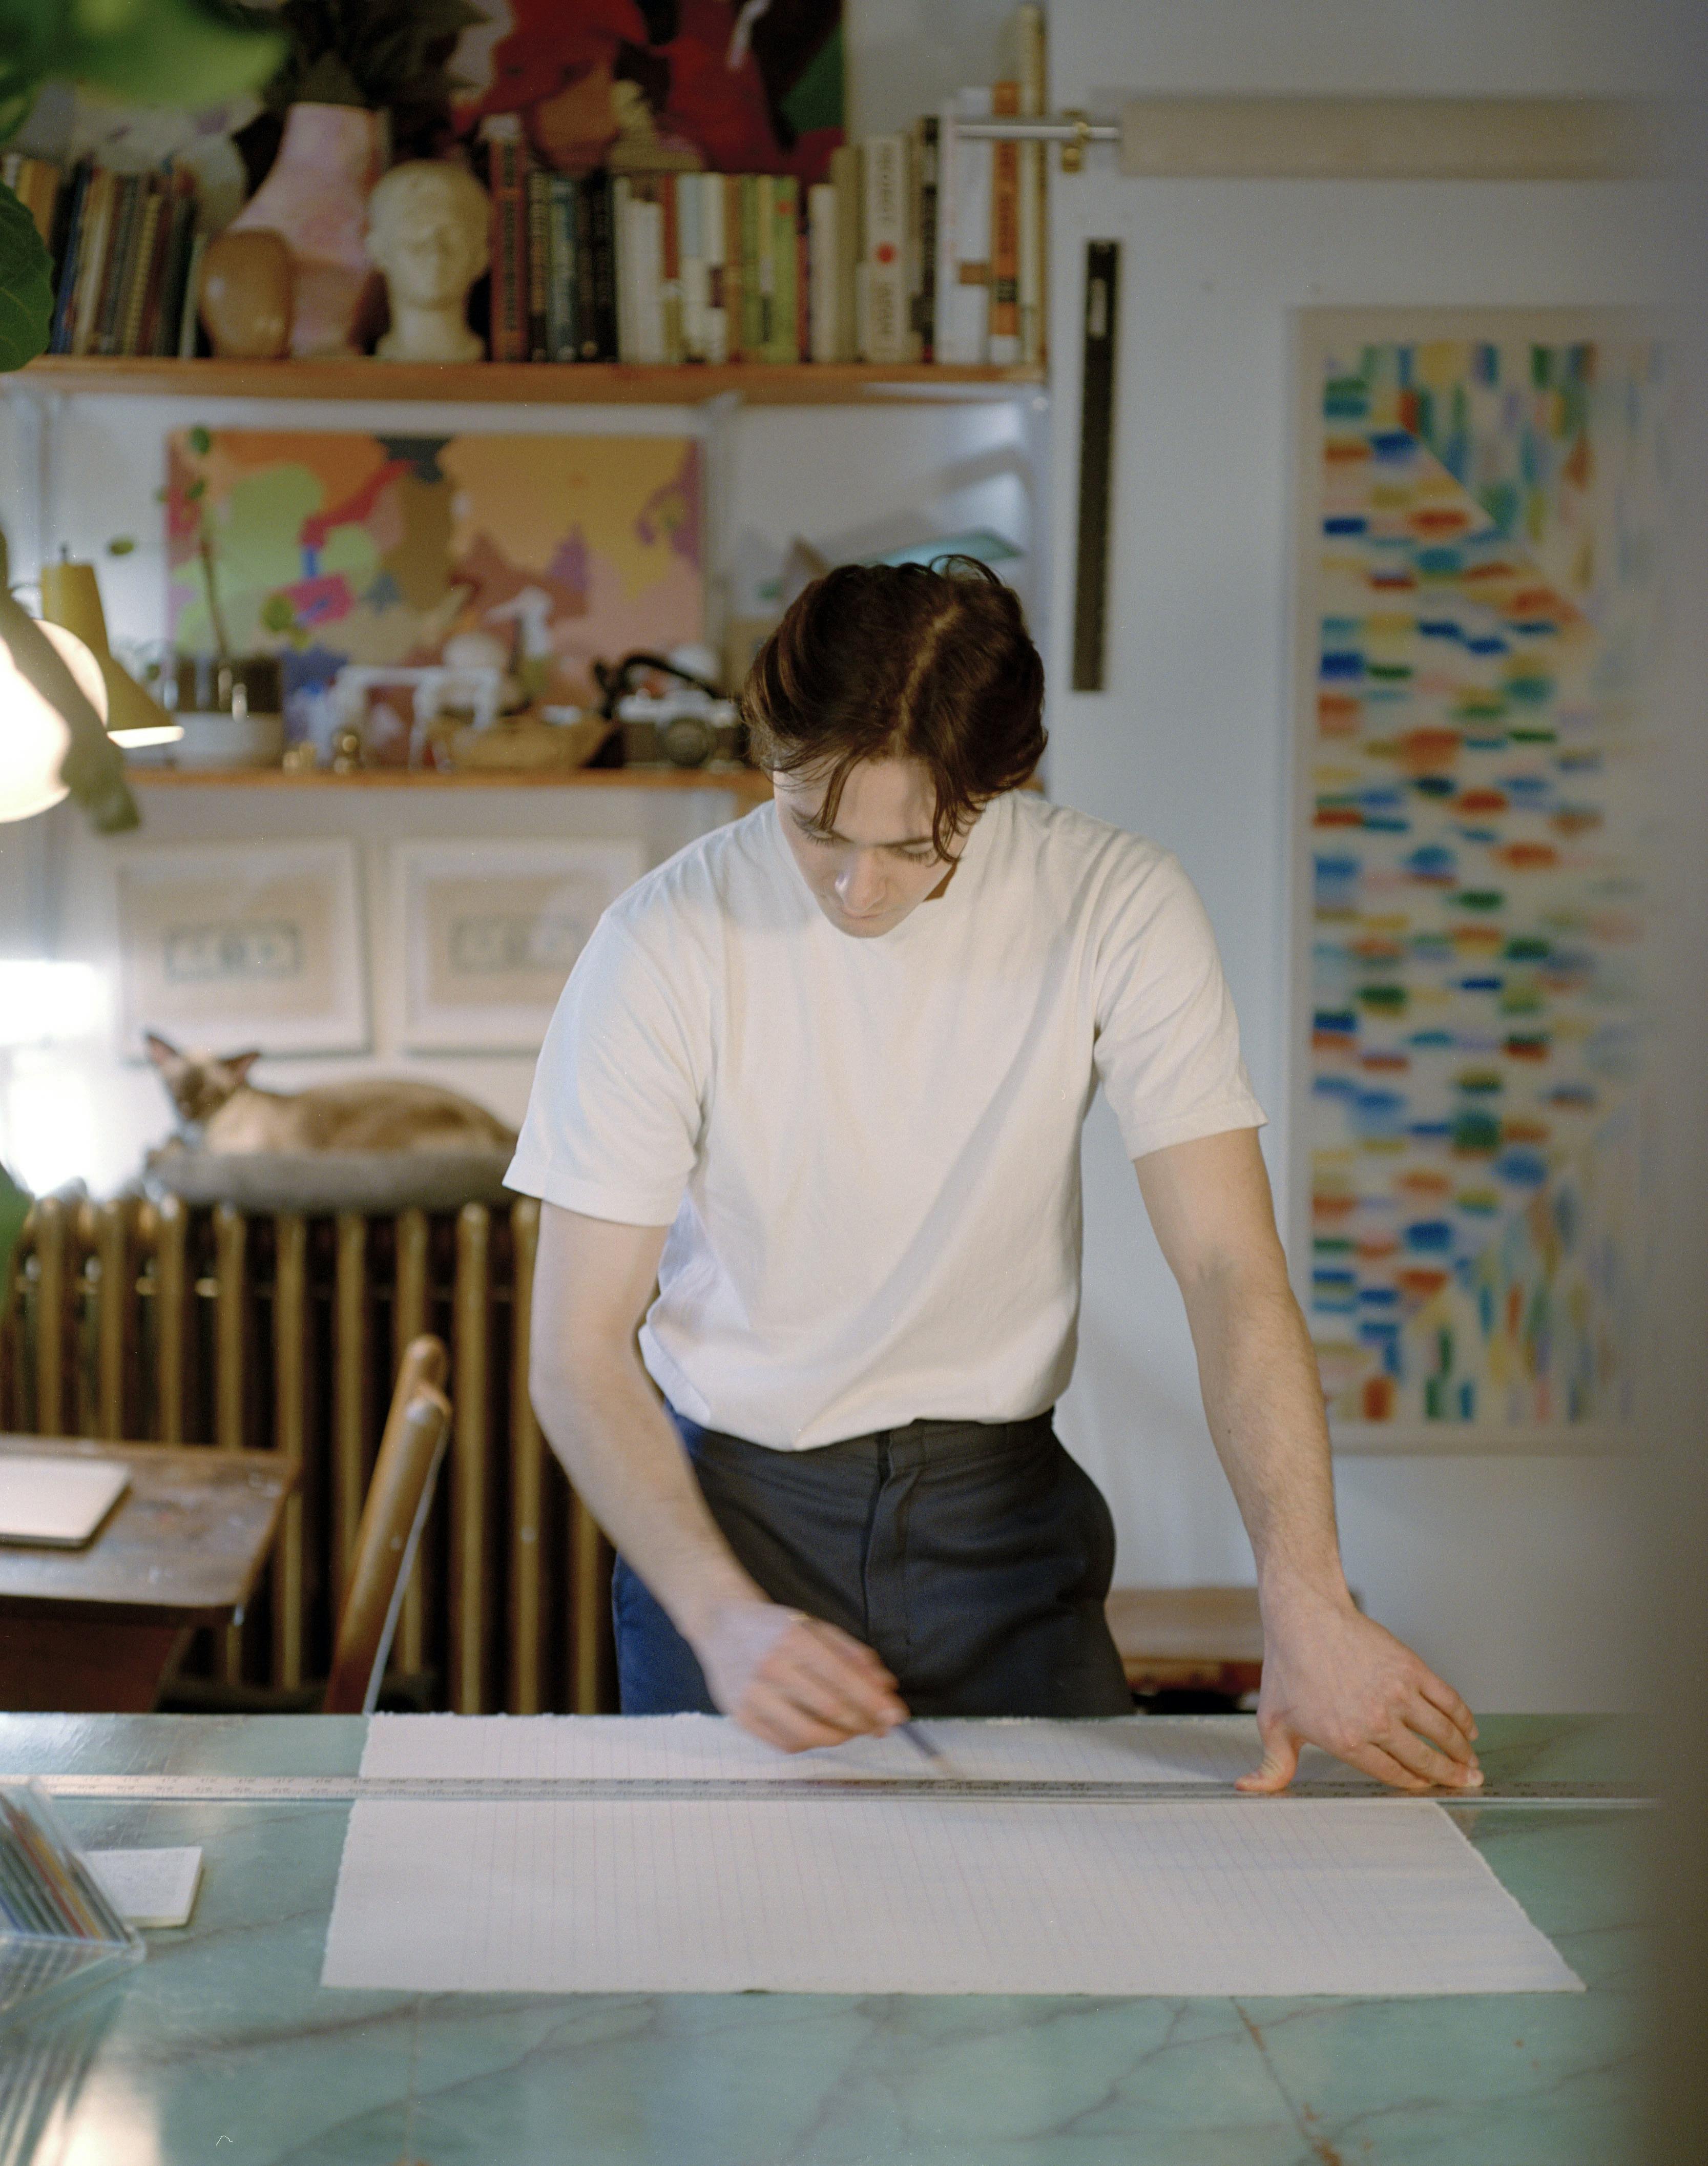 Artist Devon Reina in his studio using a ruler to draw straight pencil lines on paper.